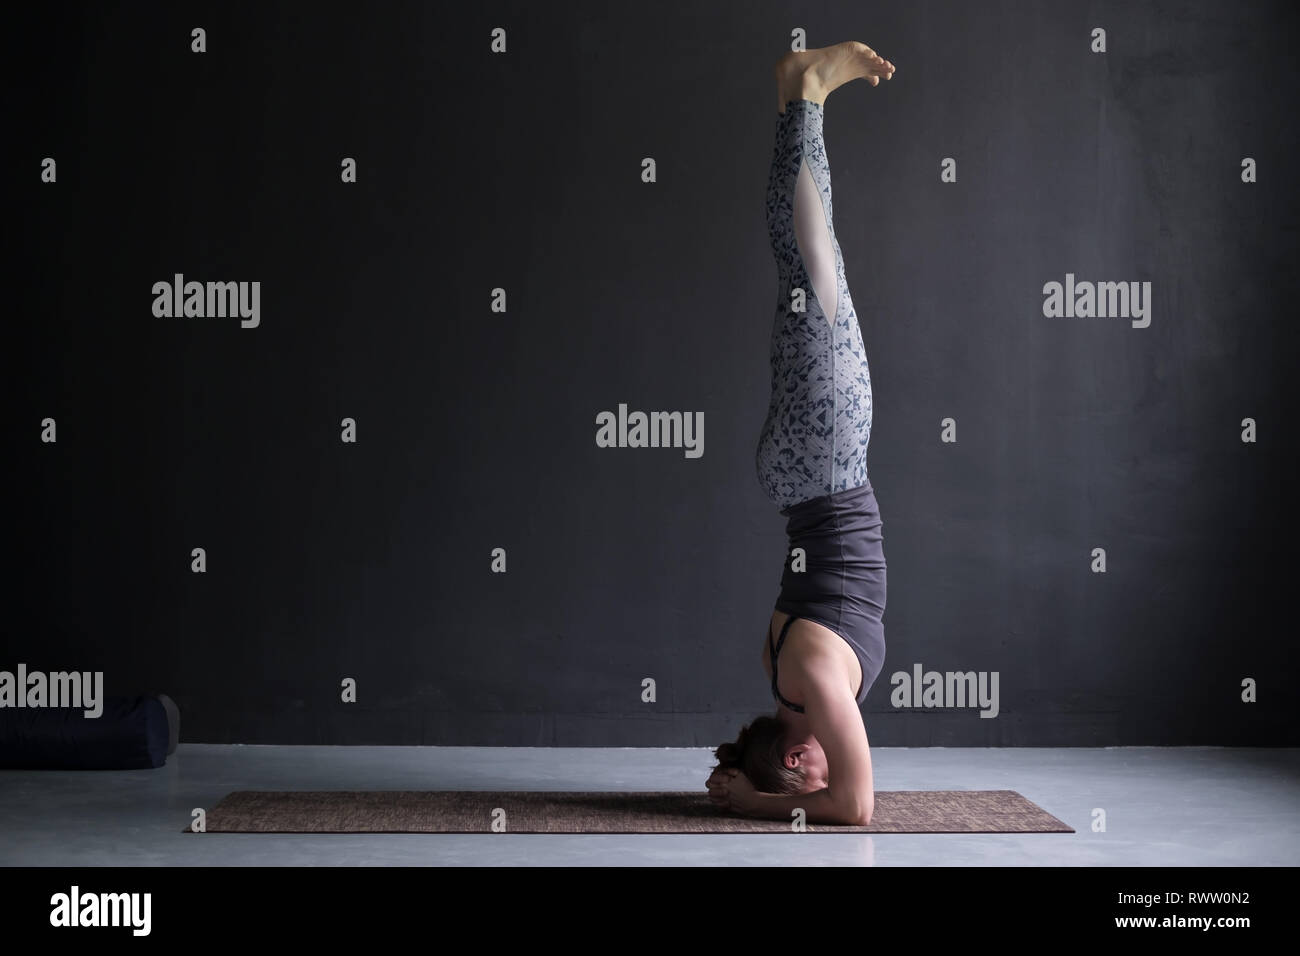 Young sporty woman practicing yoga, doing headstand exercise, salamba sirsasana pose, working out Stock Photo